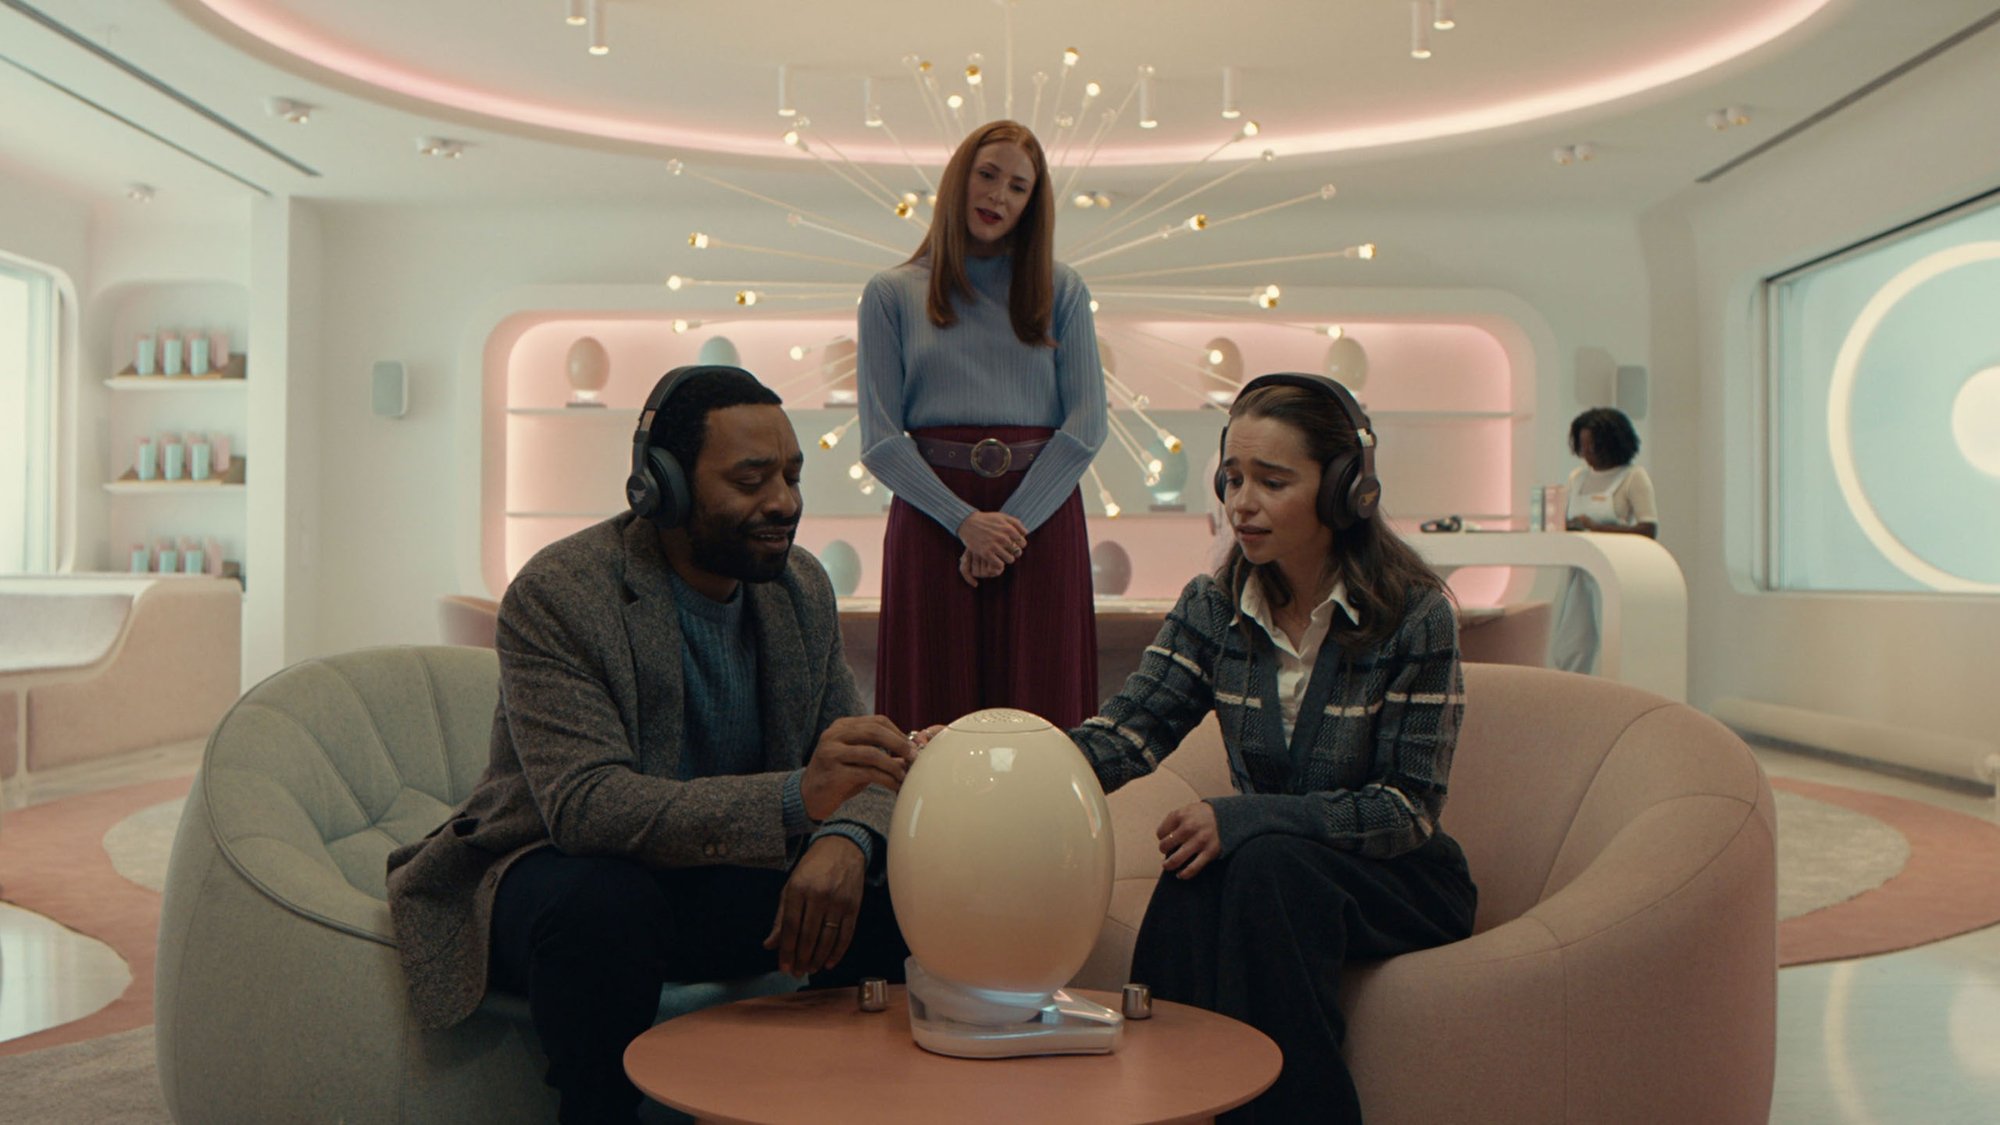 'The Pod Generation' Chiwetel Ejiofor as Alvy, Rosalie Craig as Linda Wozcheck, and Emilia Clarke as Rachel. Alvy and Rachel are sitting in front of the pod sitting on the table, touching it, while Linda is standing behind them.